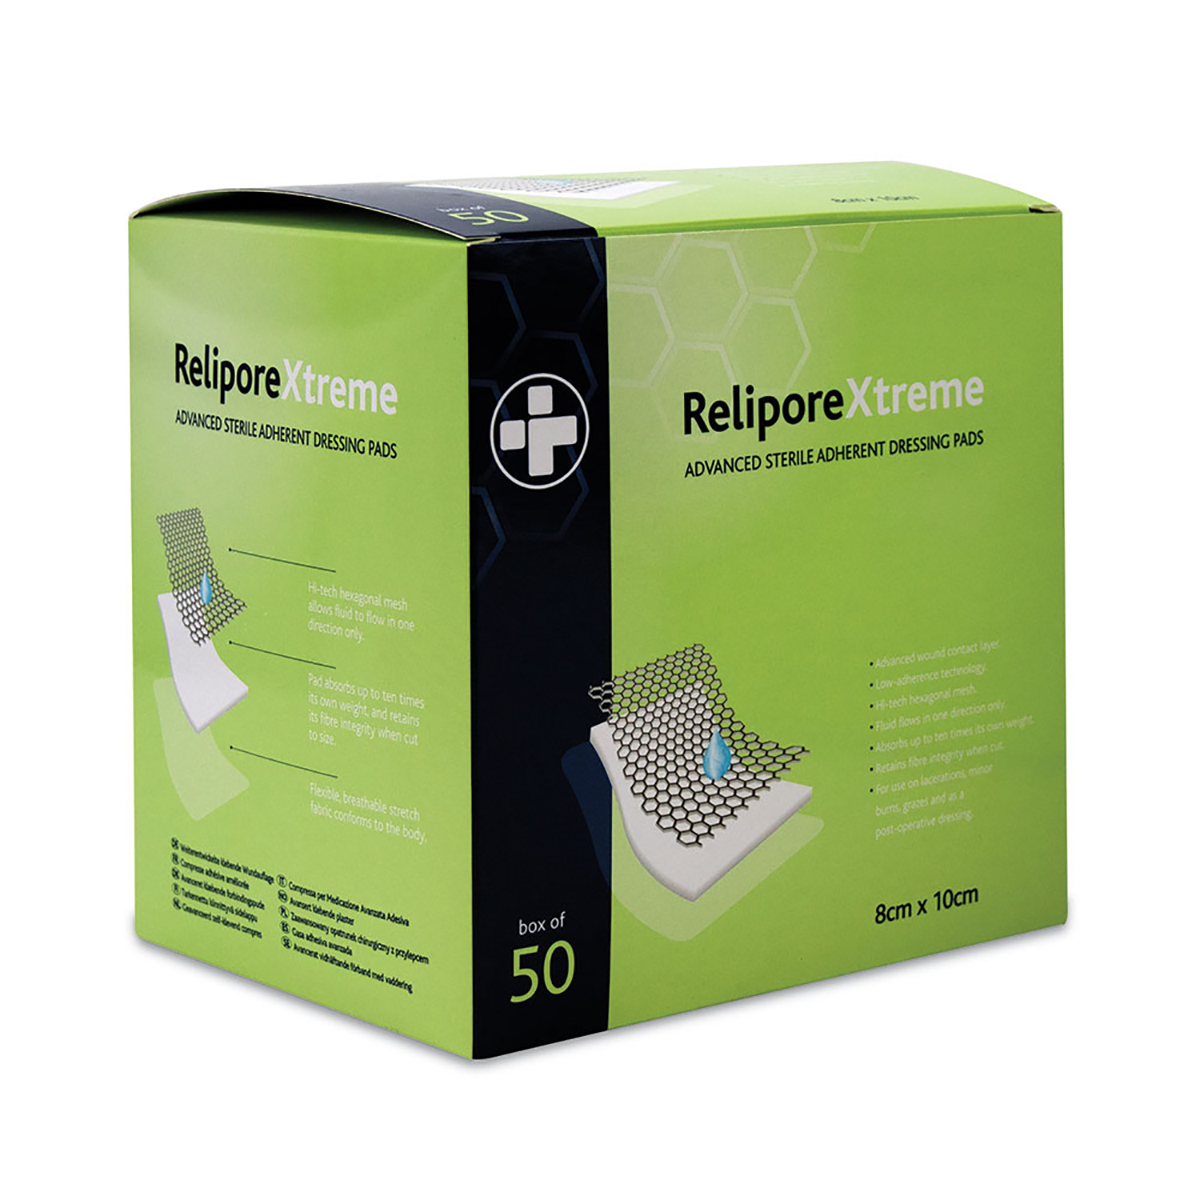 Pack of 50 8cm x 10cm Reliporextreme Dressing Pad